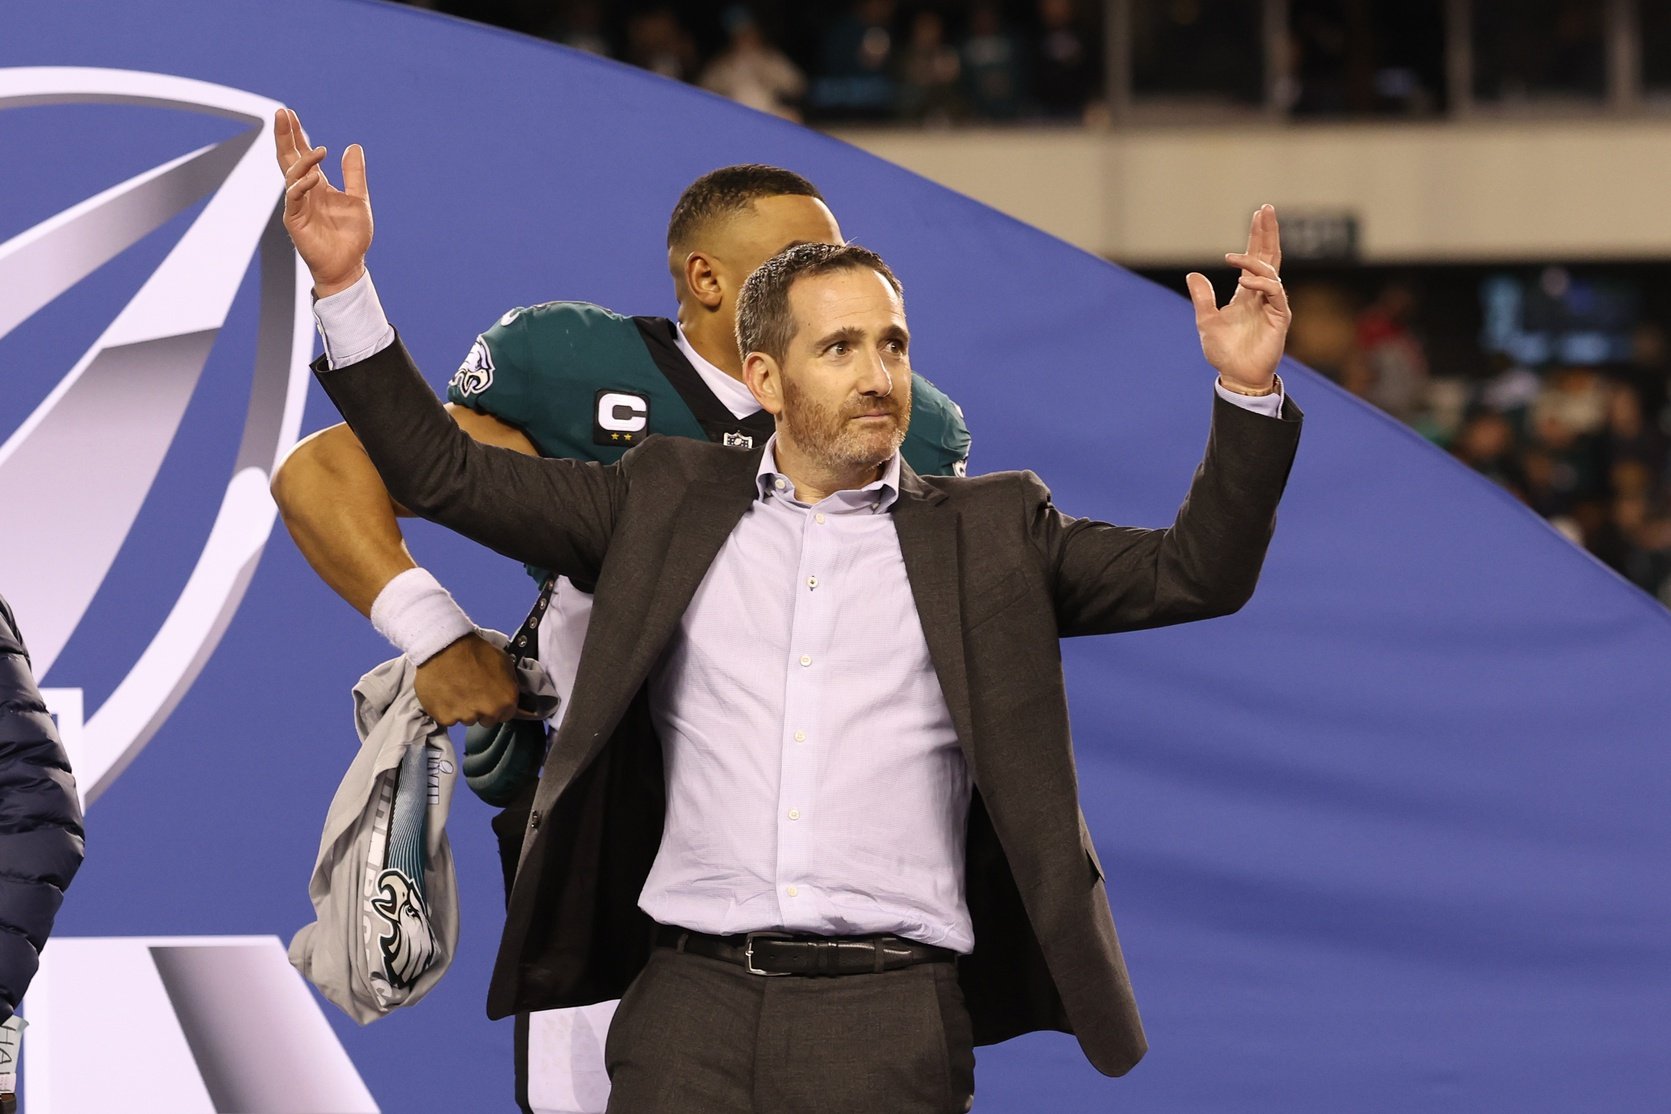 philadelphia eagles news, april 17: howie roseman discusses his draft strategy at cornerback, nfl insider sends laiatu latu to eagles in latest mock draft, and more